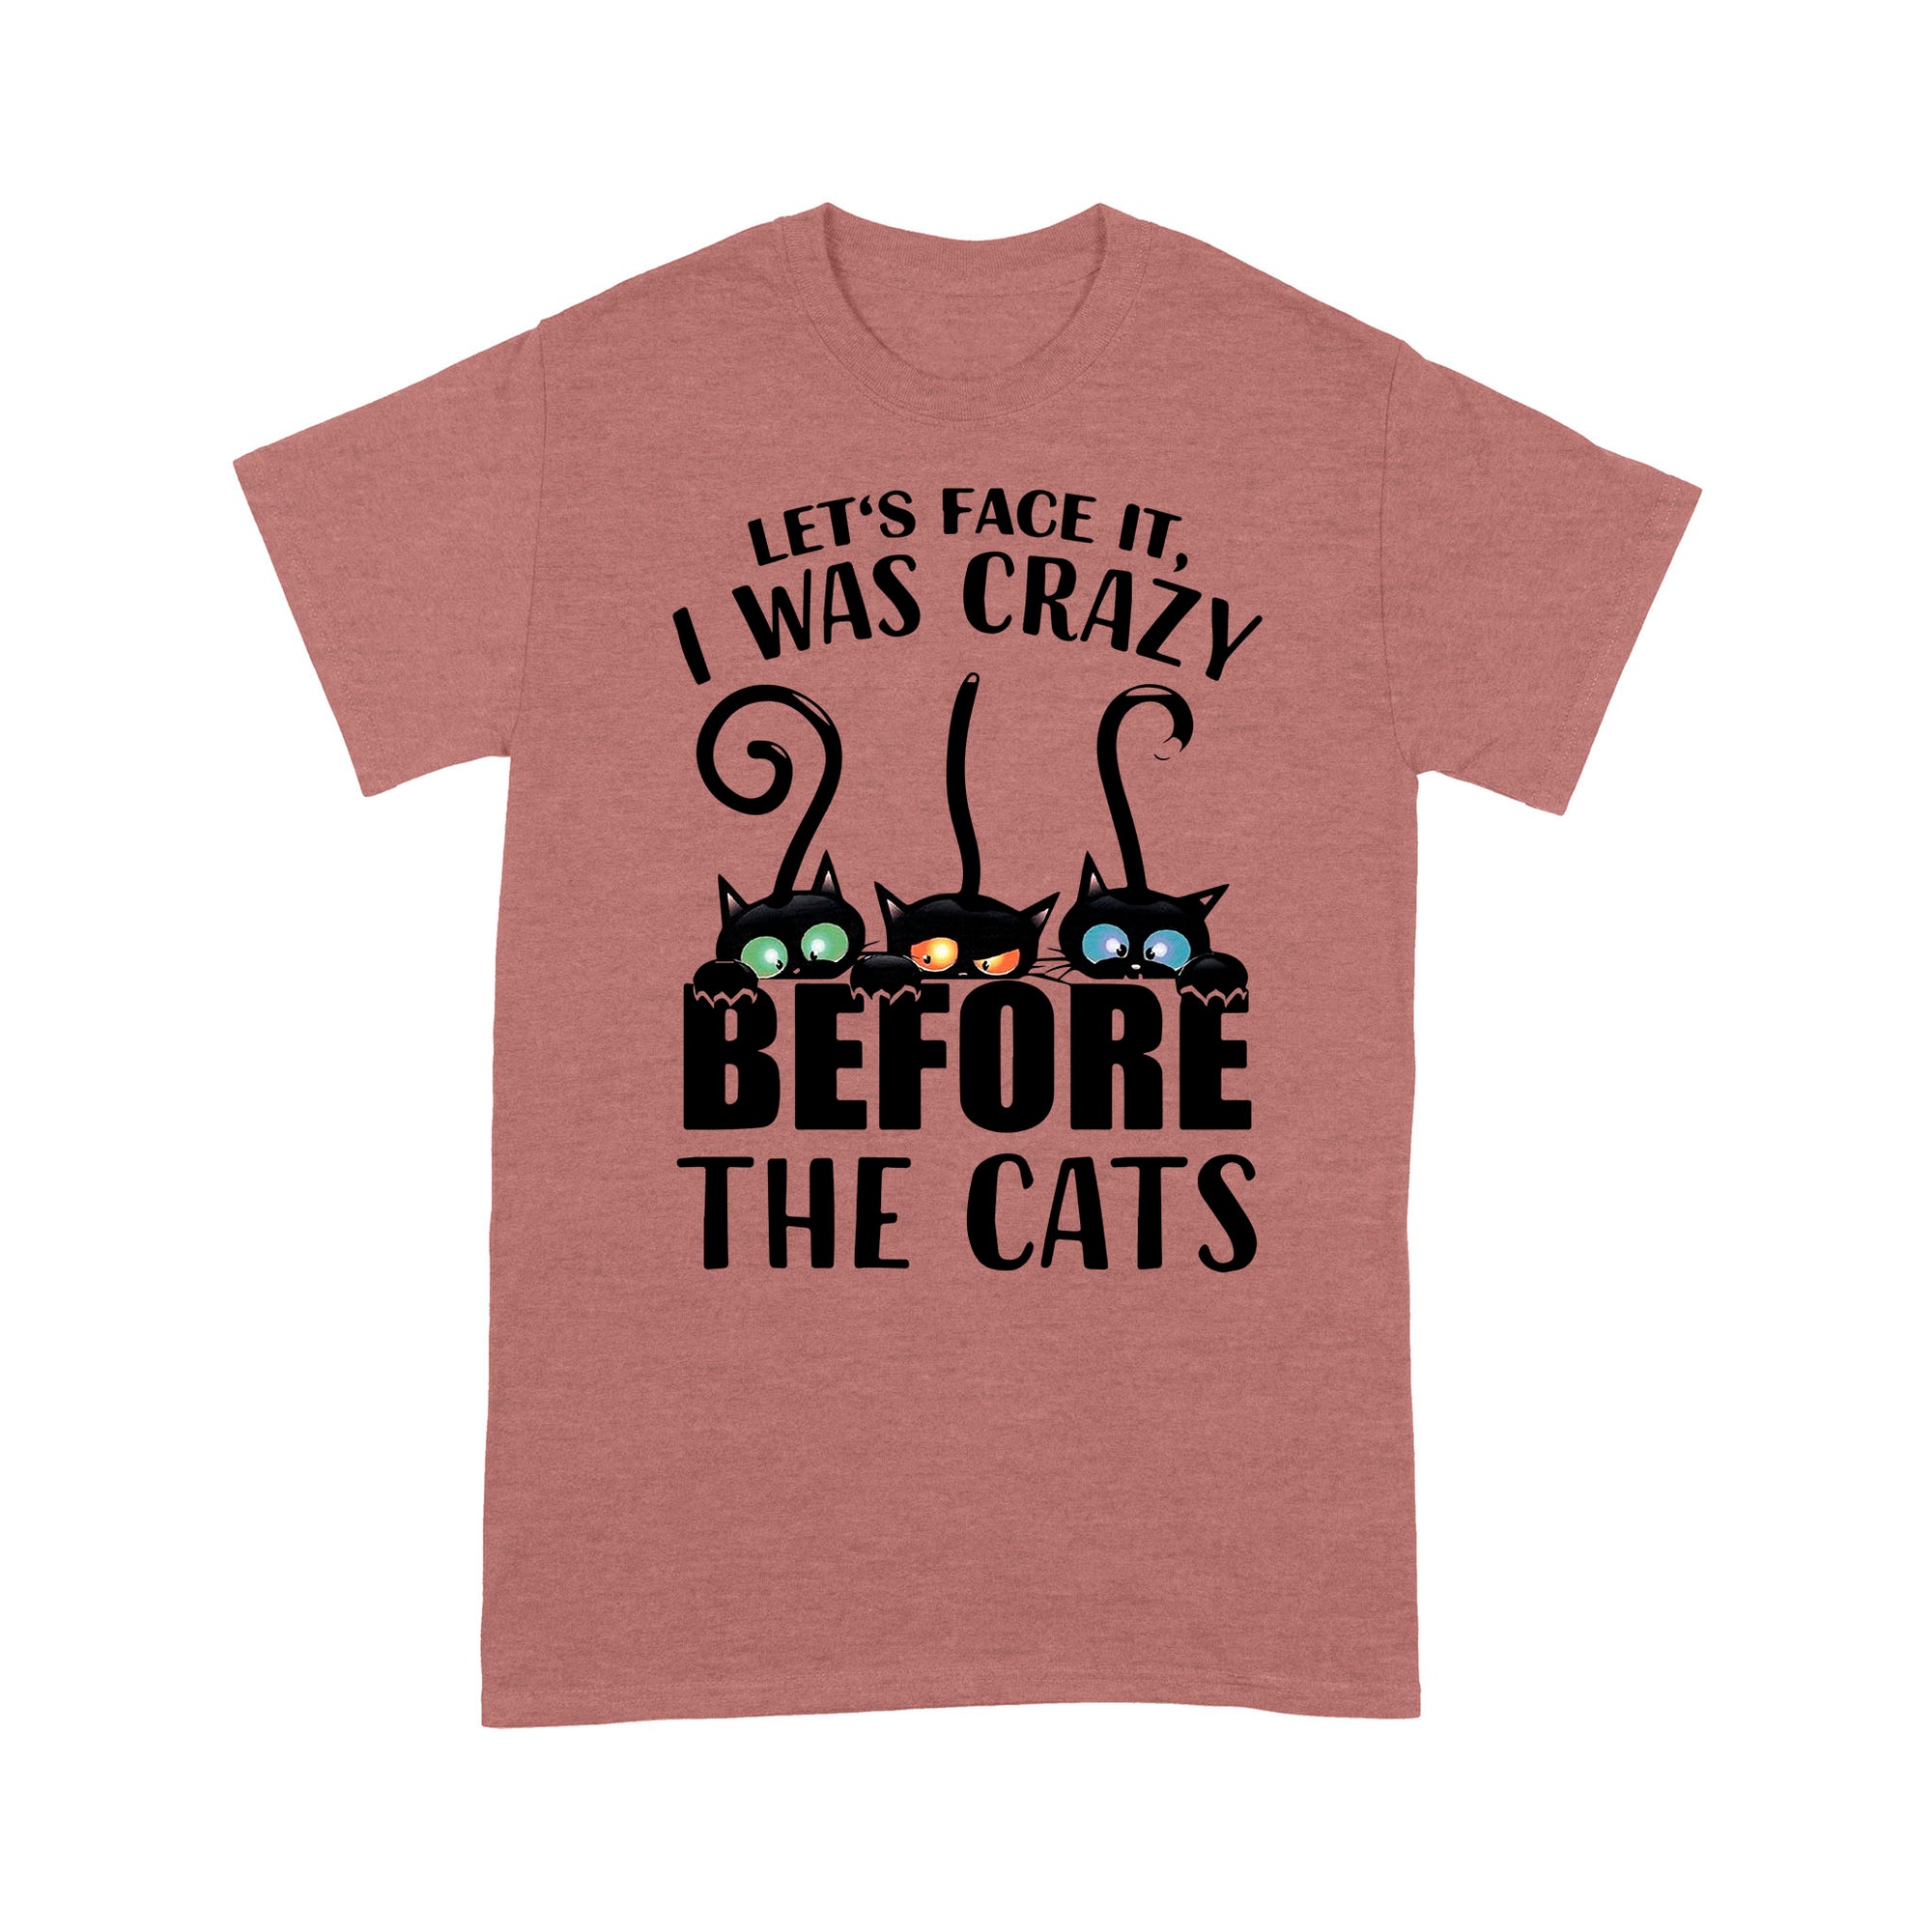 Let's Face It I Was Crazy Before The Cats - Premium T-shirt